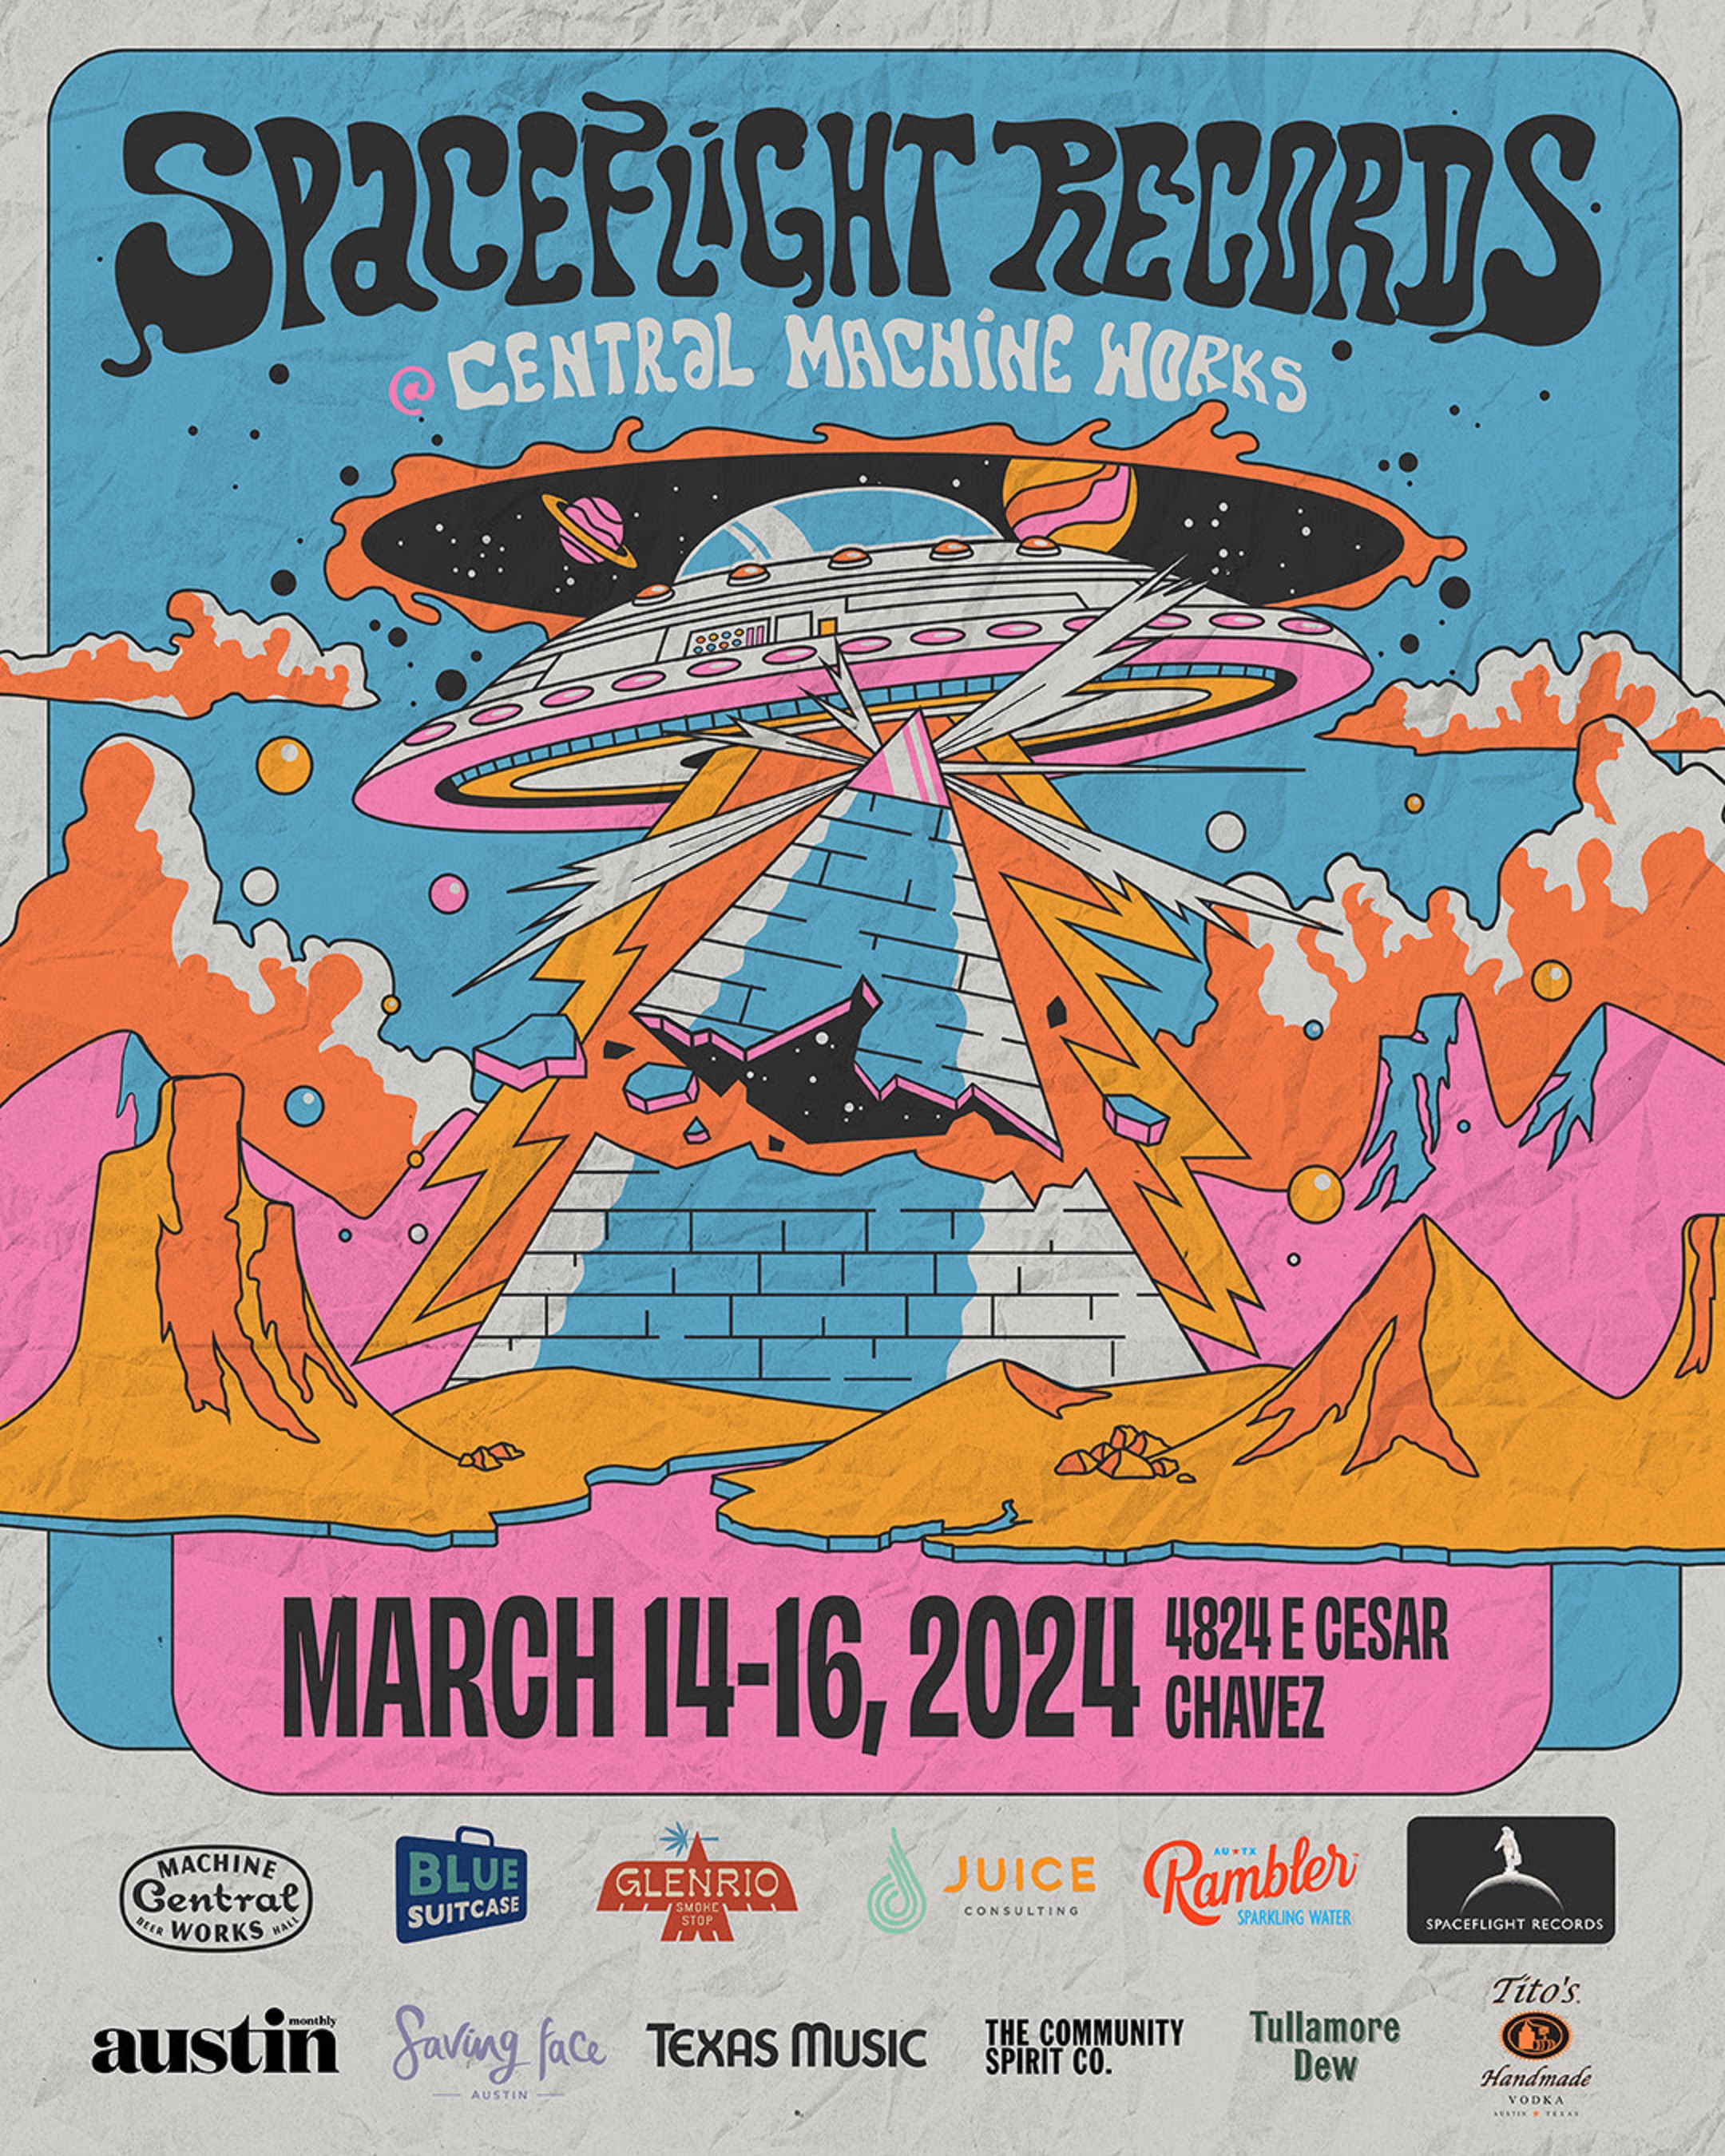 Spaceflight Records’ local music & arts takeover at Central Machine Works March 14 - 16